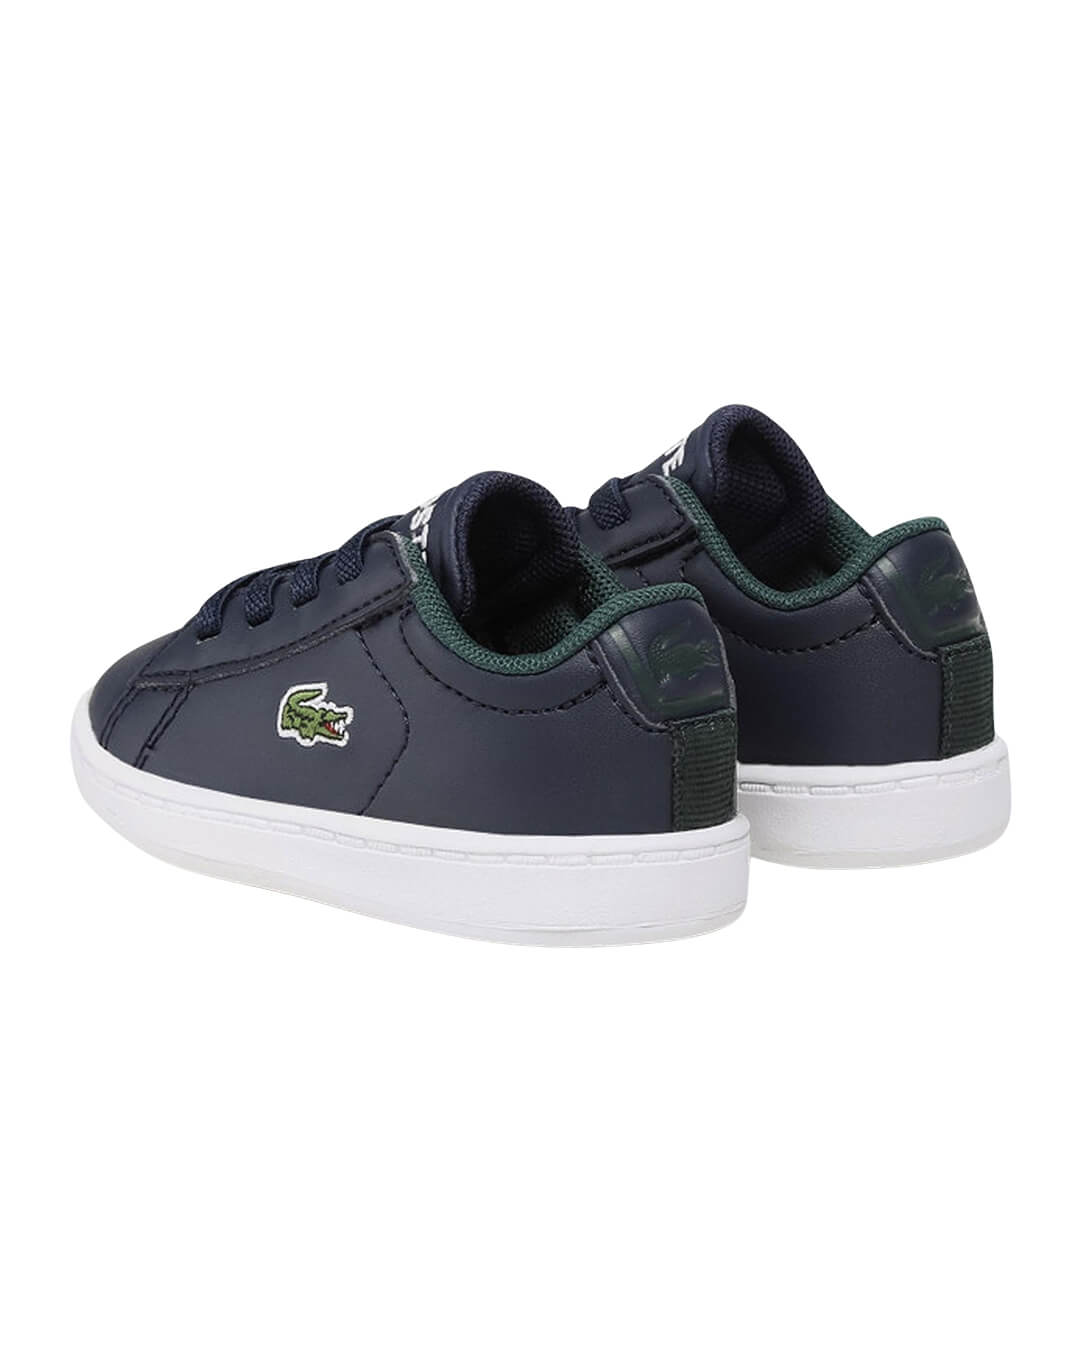 Lacoste Shoes Lacoste Carnaby Black Leather Sneakers